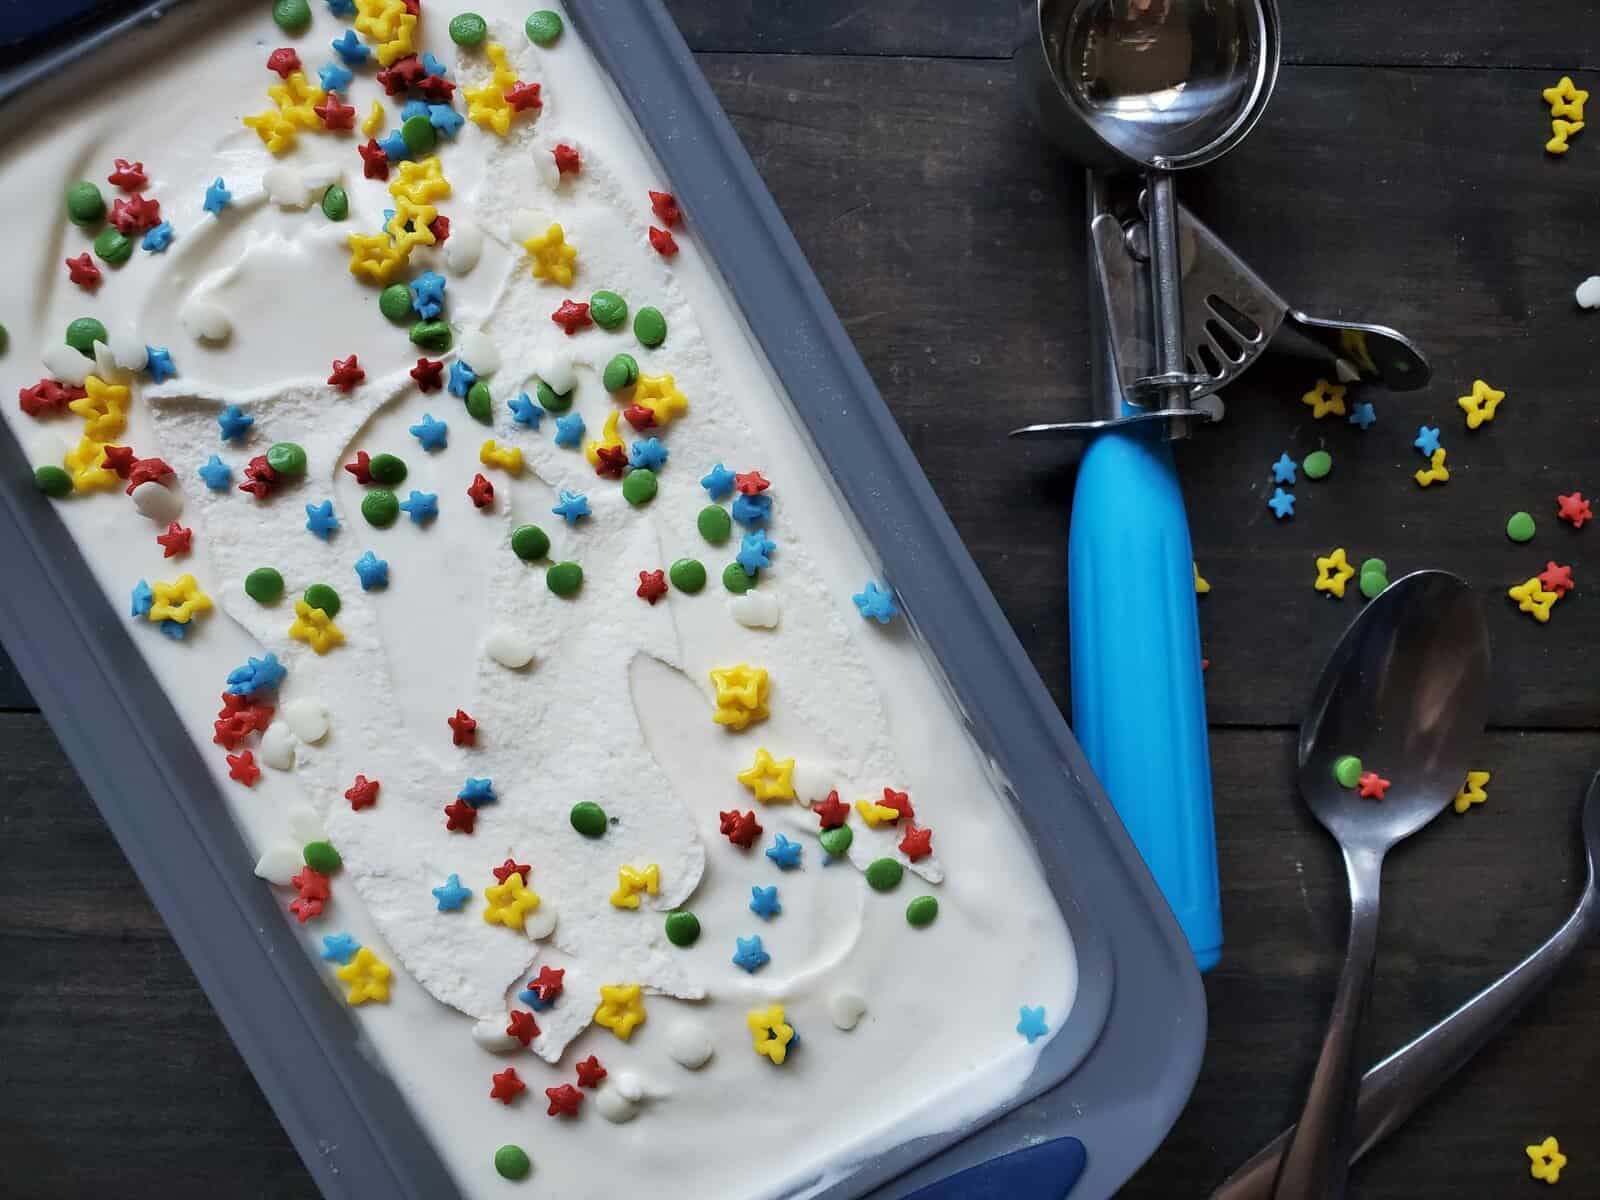 White ice cream in a container with sprinkles on top, with spoons and an ice cream scoop nearby.